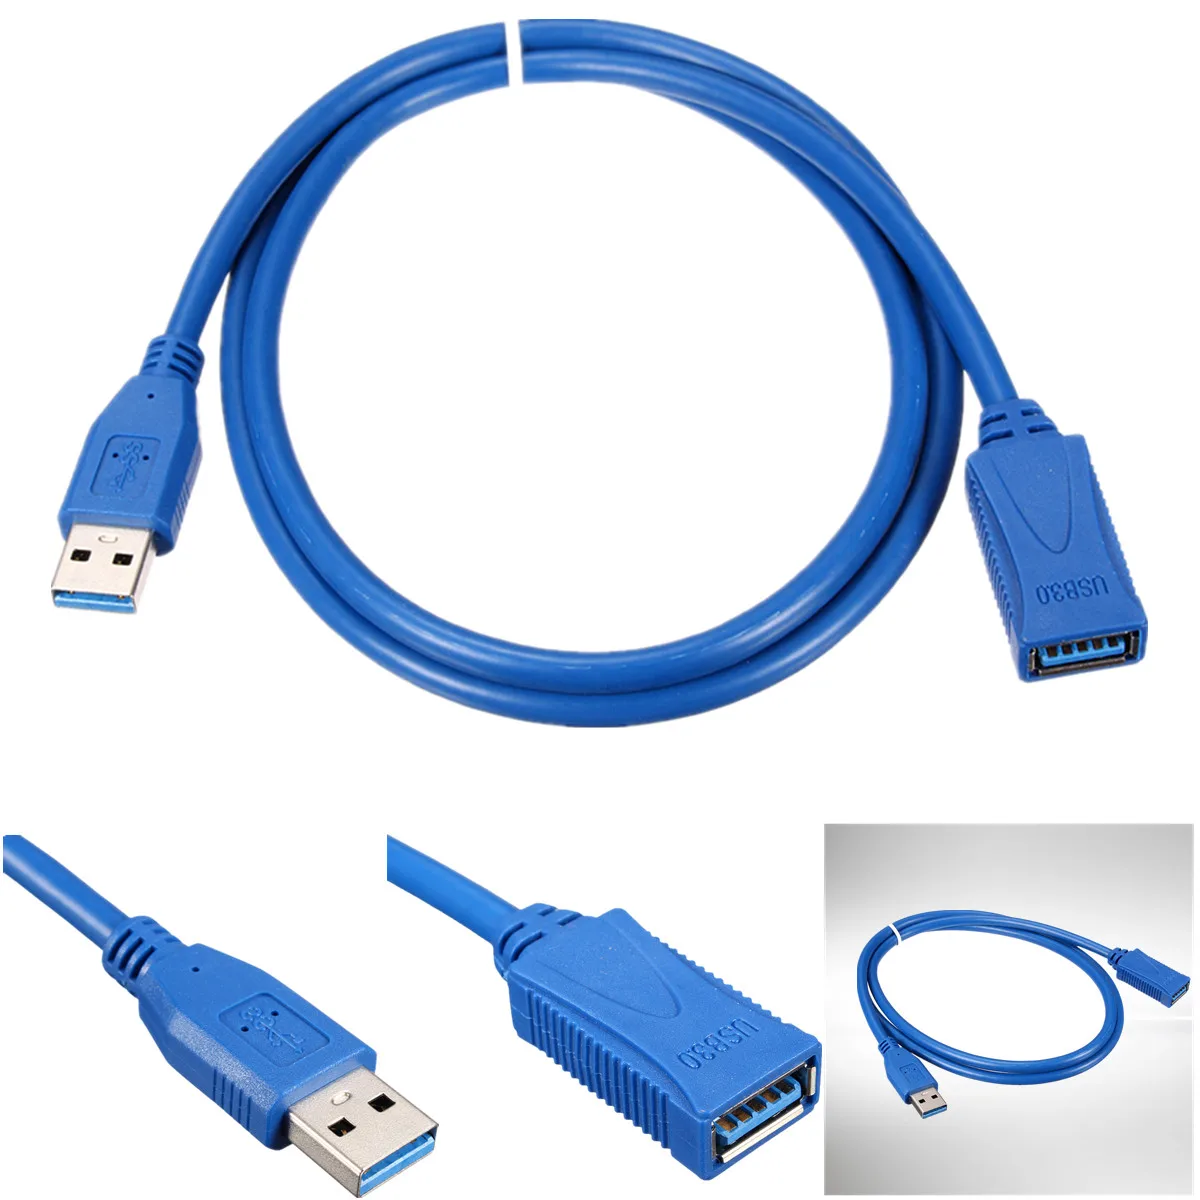 1M High Speed USB 3.0 A Male to Female Cable Wire Extension Data Transfer M/F Blue | Компьютеры и офис